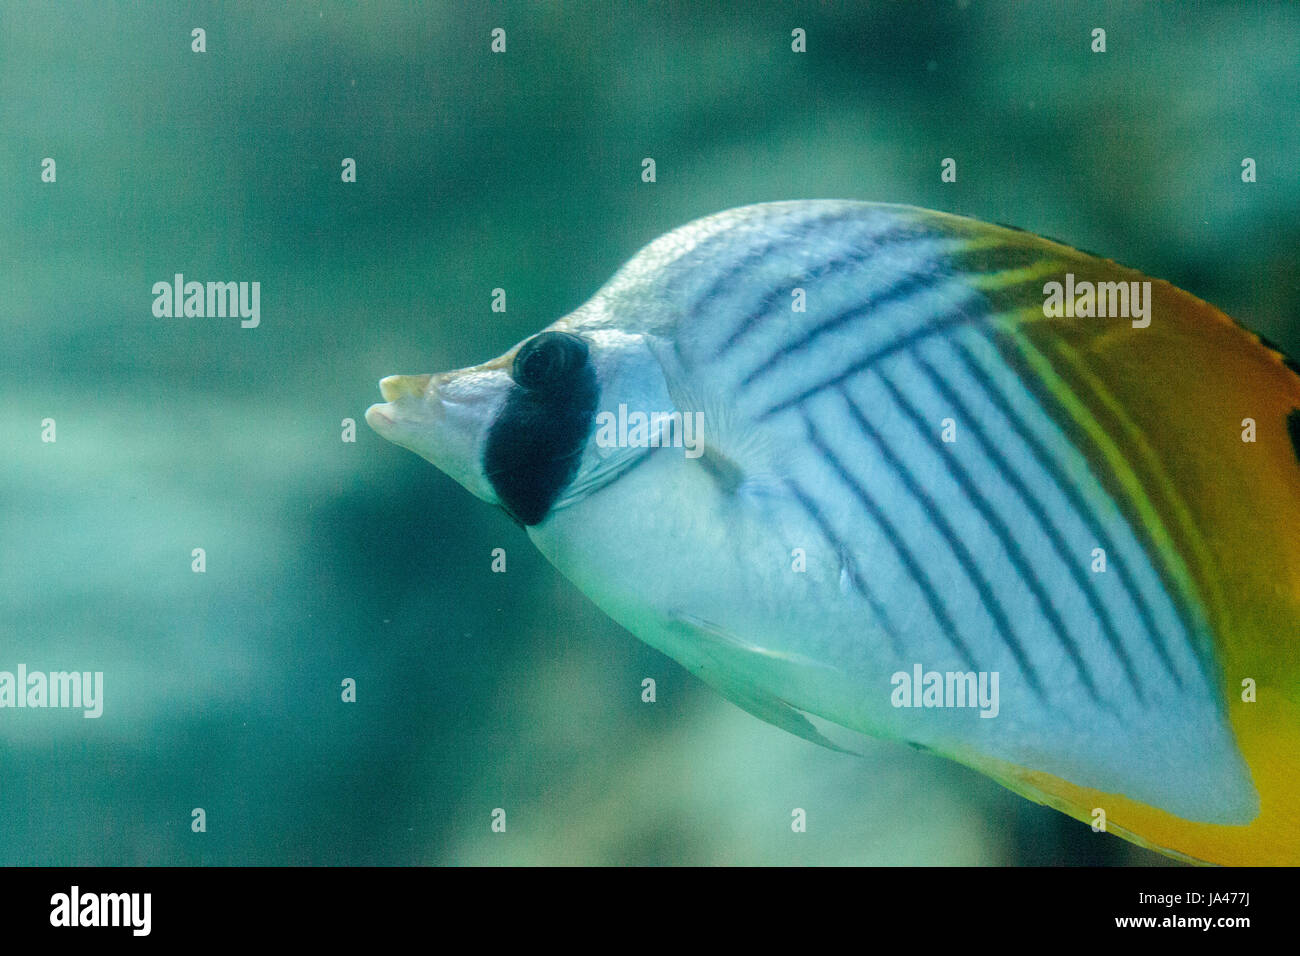 Threadfin butterflyfish, Chaetodon auriga, is a yellow, white and black fish with a sharp, pointed mouth found on the marine reef. Stock Photo